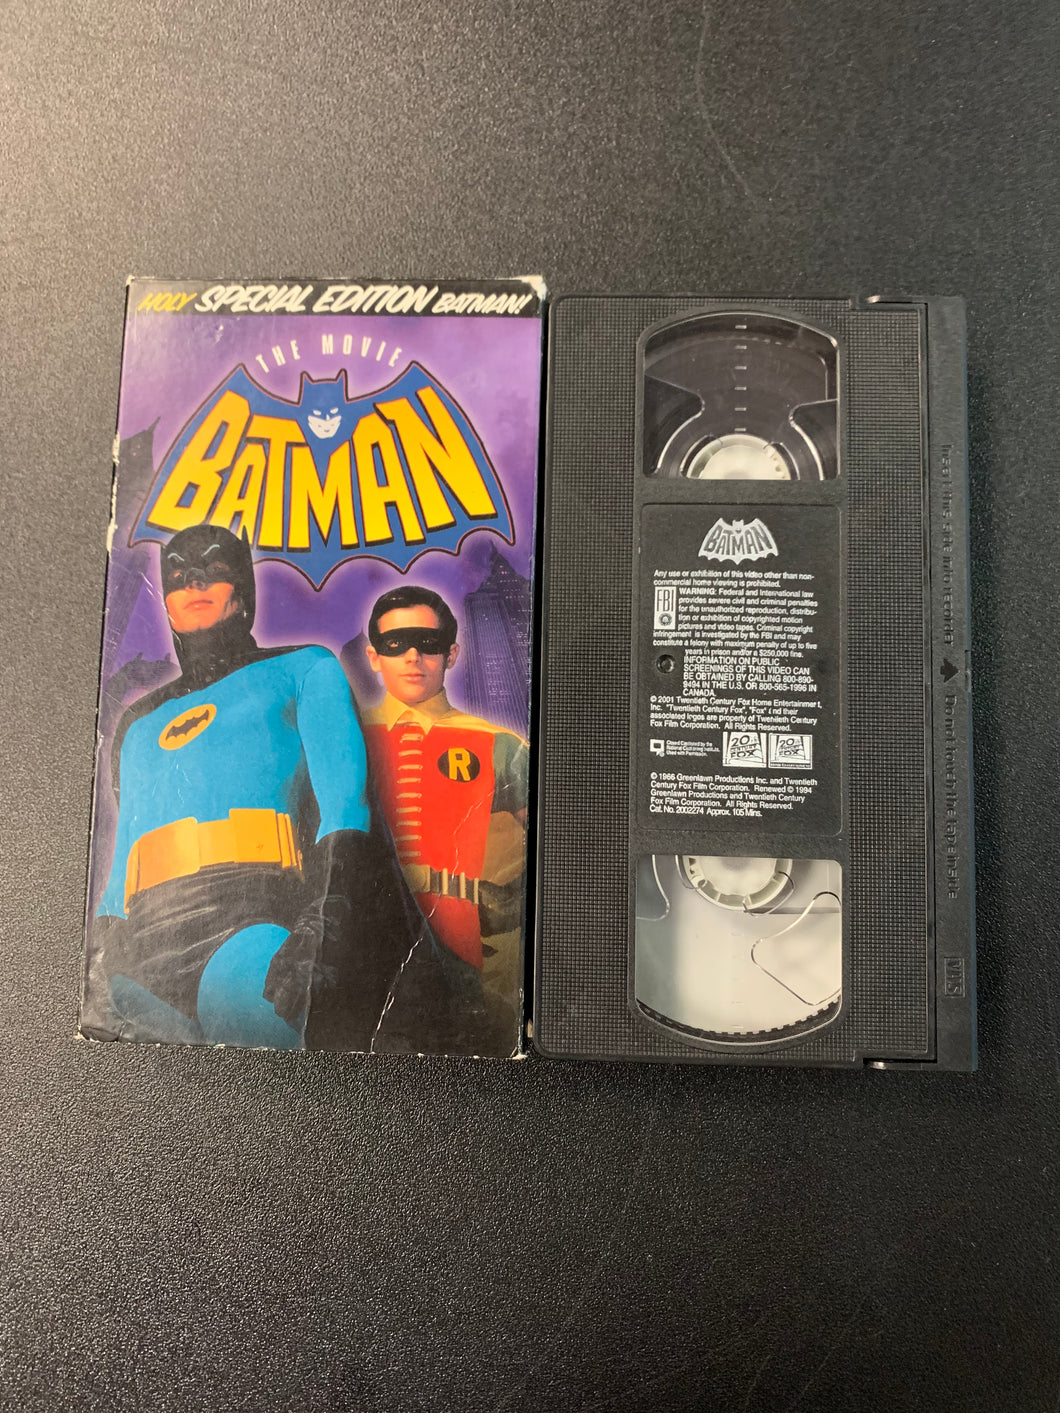 BATMAN THE MOVIE SPECIAL EDITION VHS TAPE PREOWNED